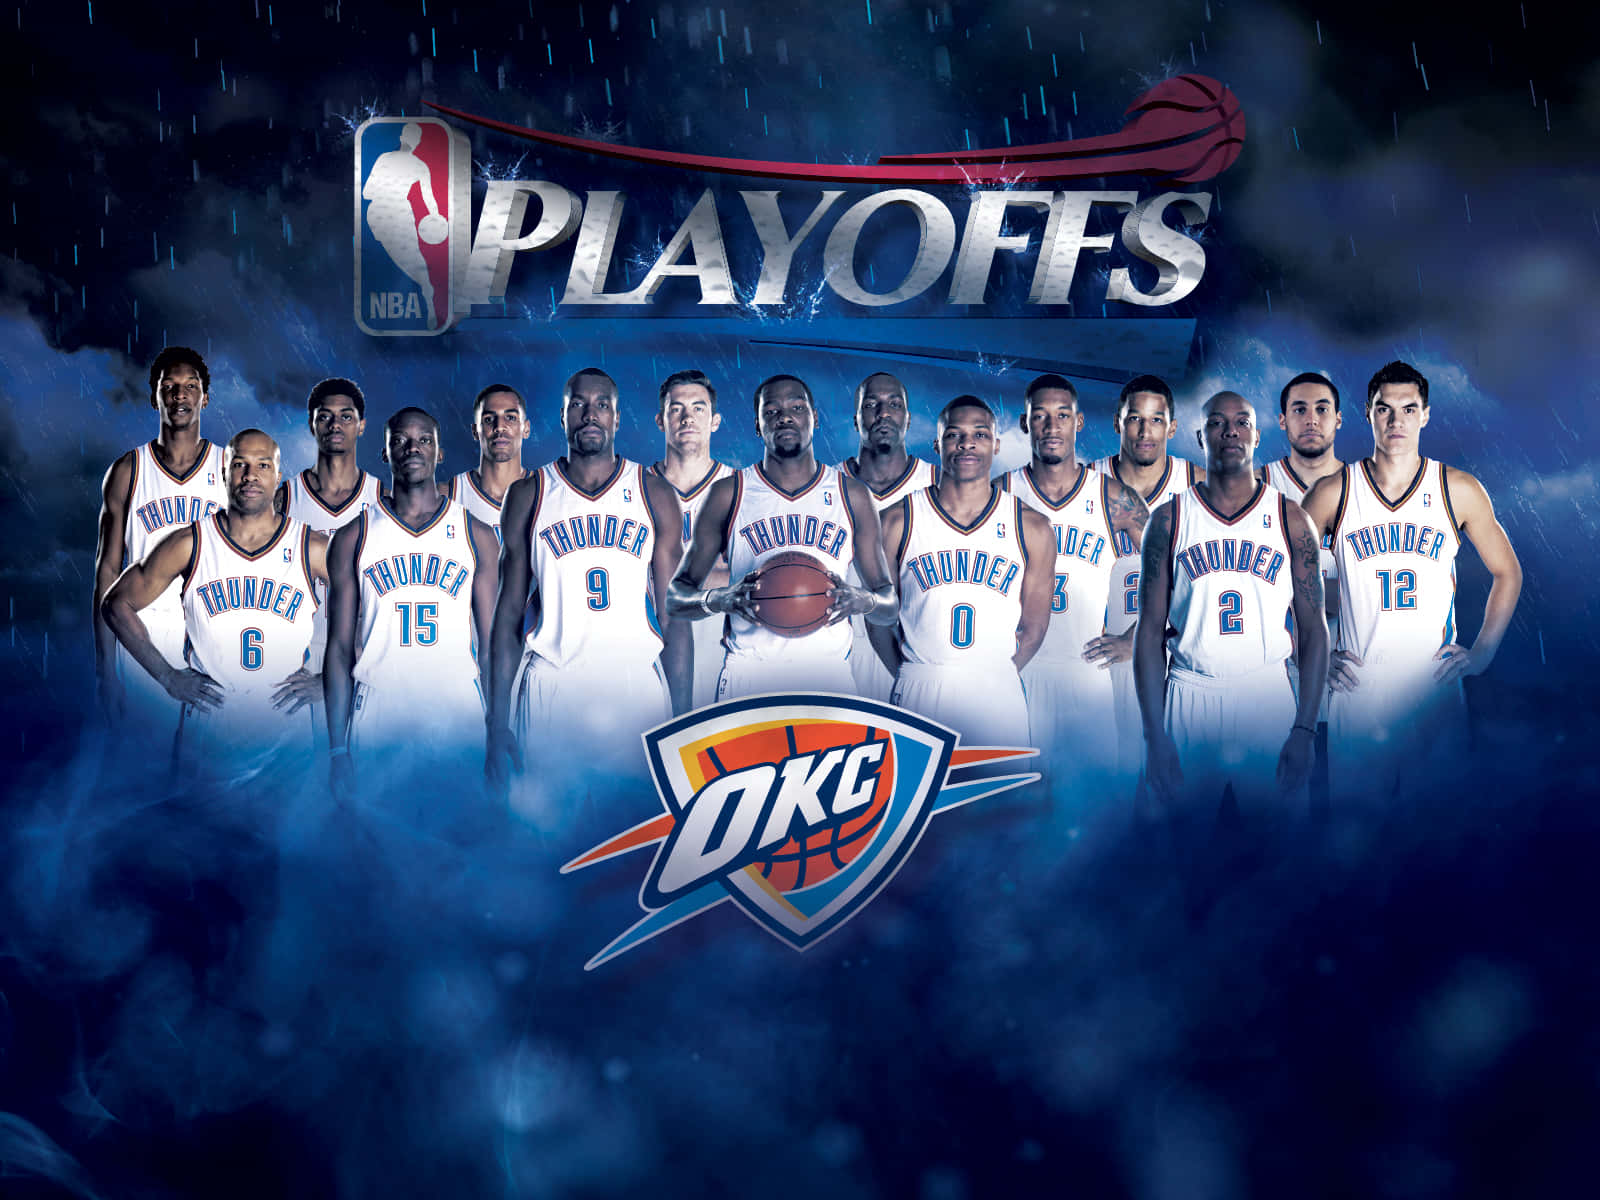 Oklahoma City Thunders 2012 PLAYOFFS Roster Wallpaper